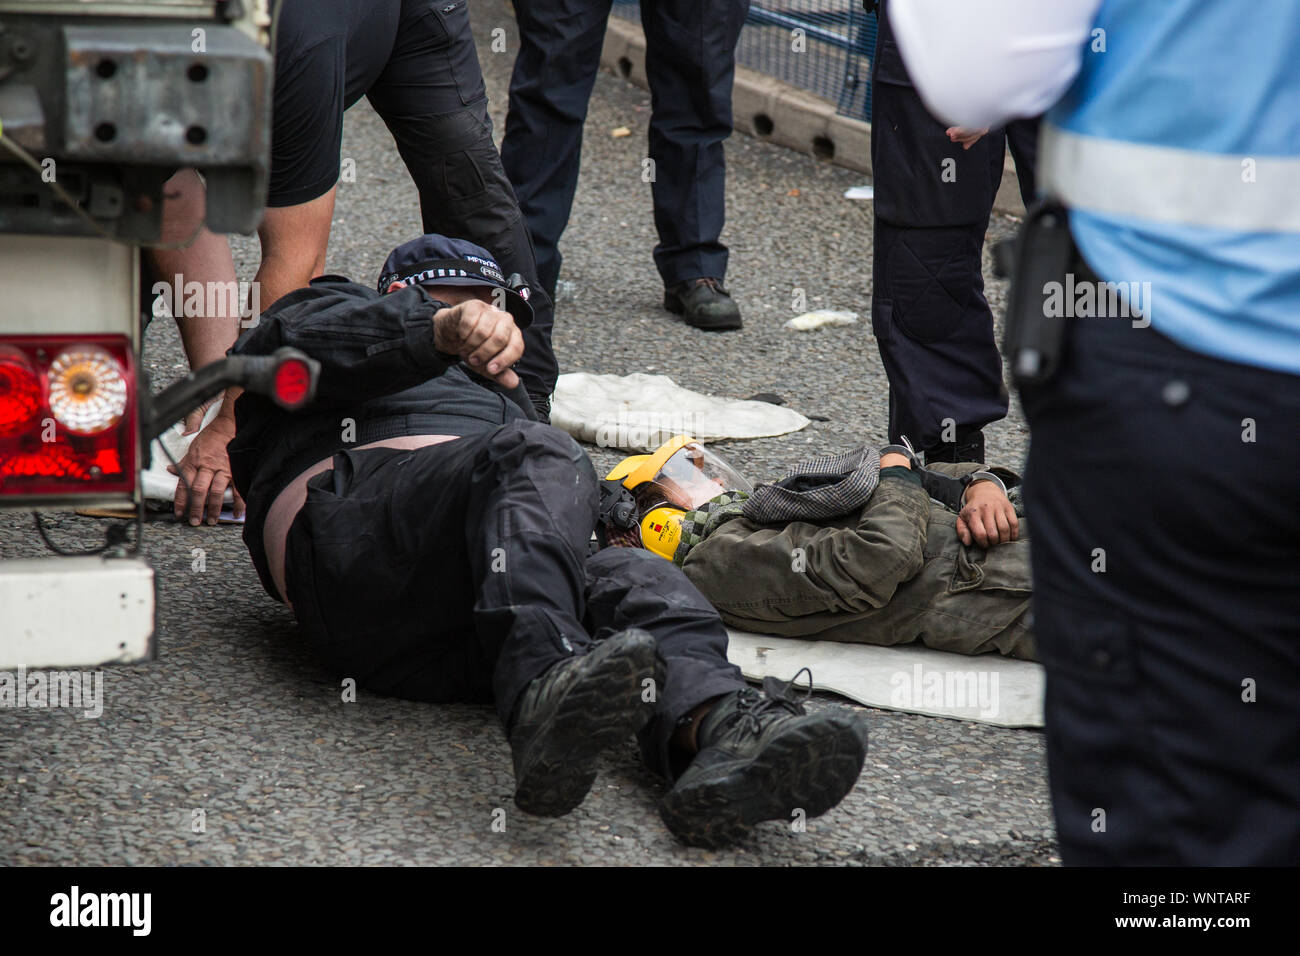 London, UK. 6 September, 2019. Metropolitan Police officers arrest an activist who had locked herself beneath a truck making a delivery to ExCel London for DSEI, the world’s largest arms fair. The road remained blocked for several hours. The fifth day of protests against the arms fair was themed as Stop The Arms Fair: Stop Climate Change in order to highlight links between the fossil fuel and arms industries. Credit: Mark Kerrison/Alamy Live News Stock Photo